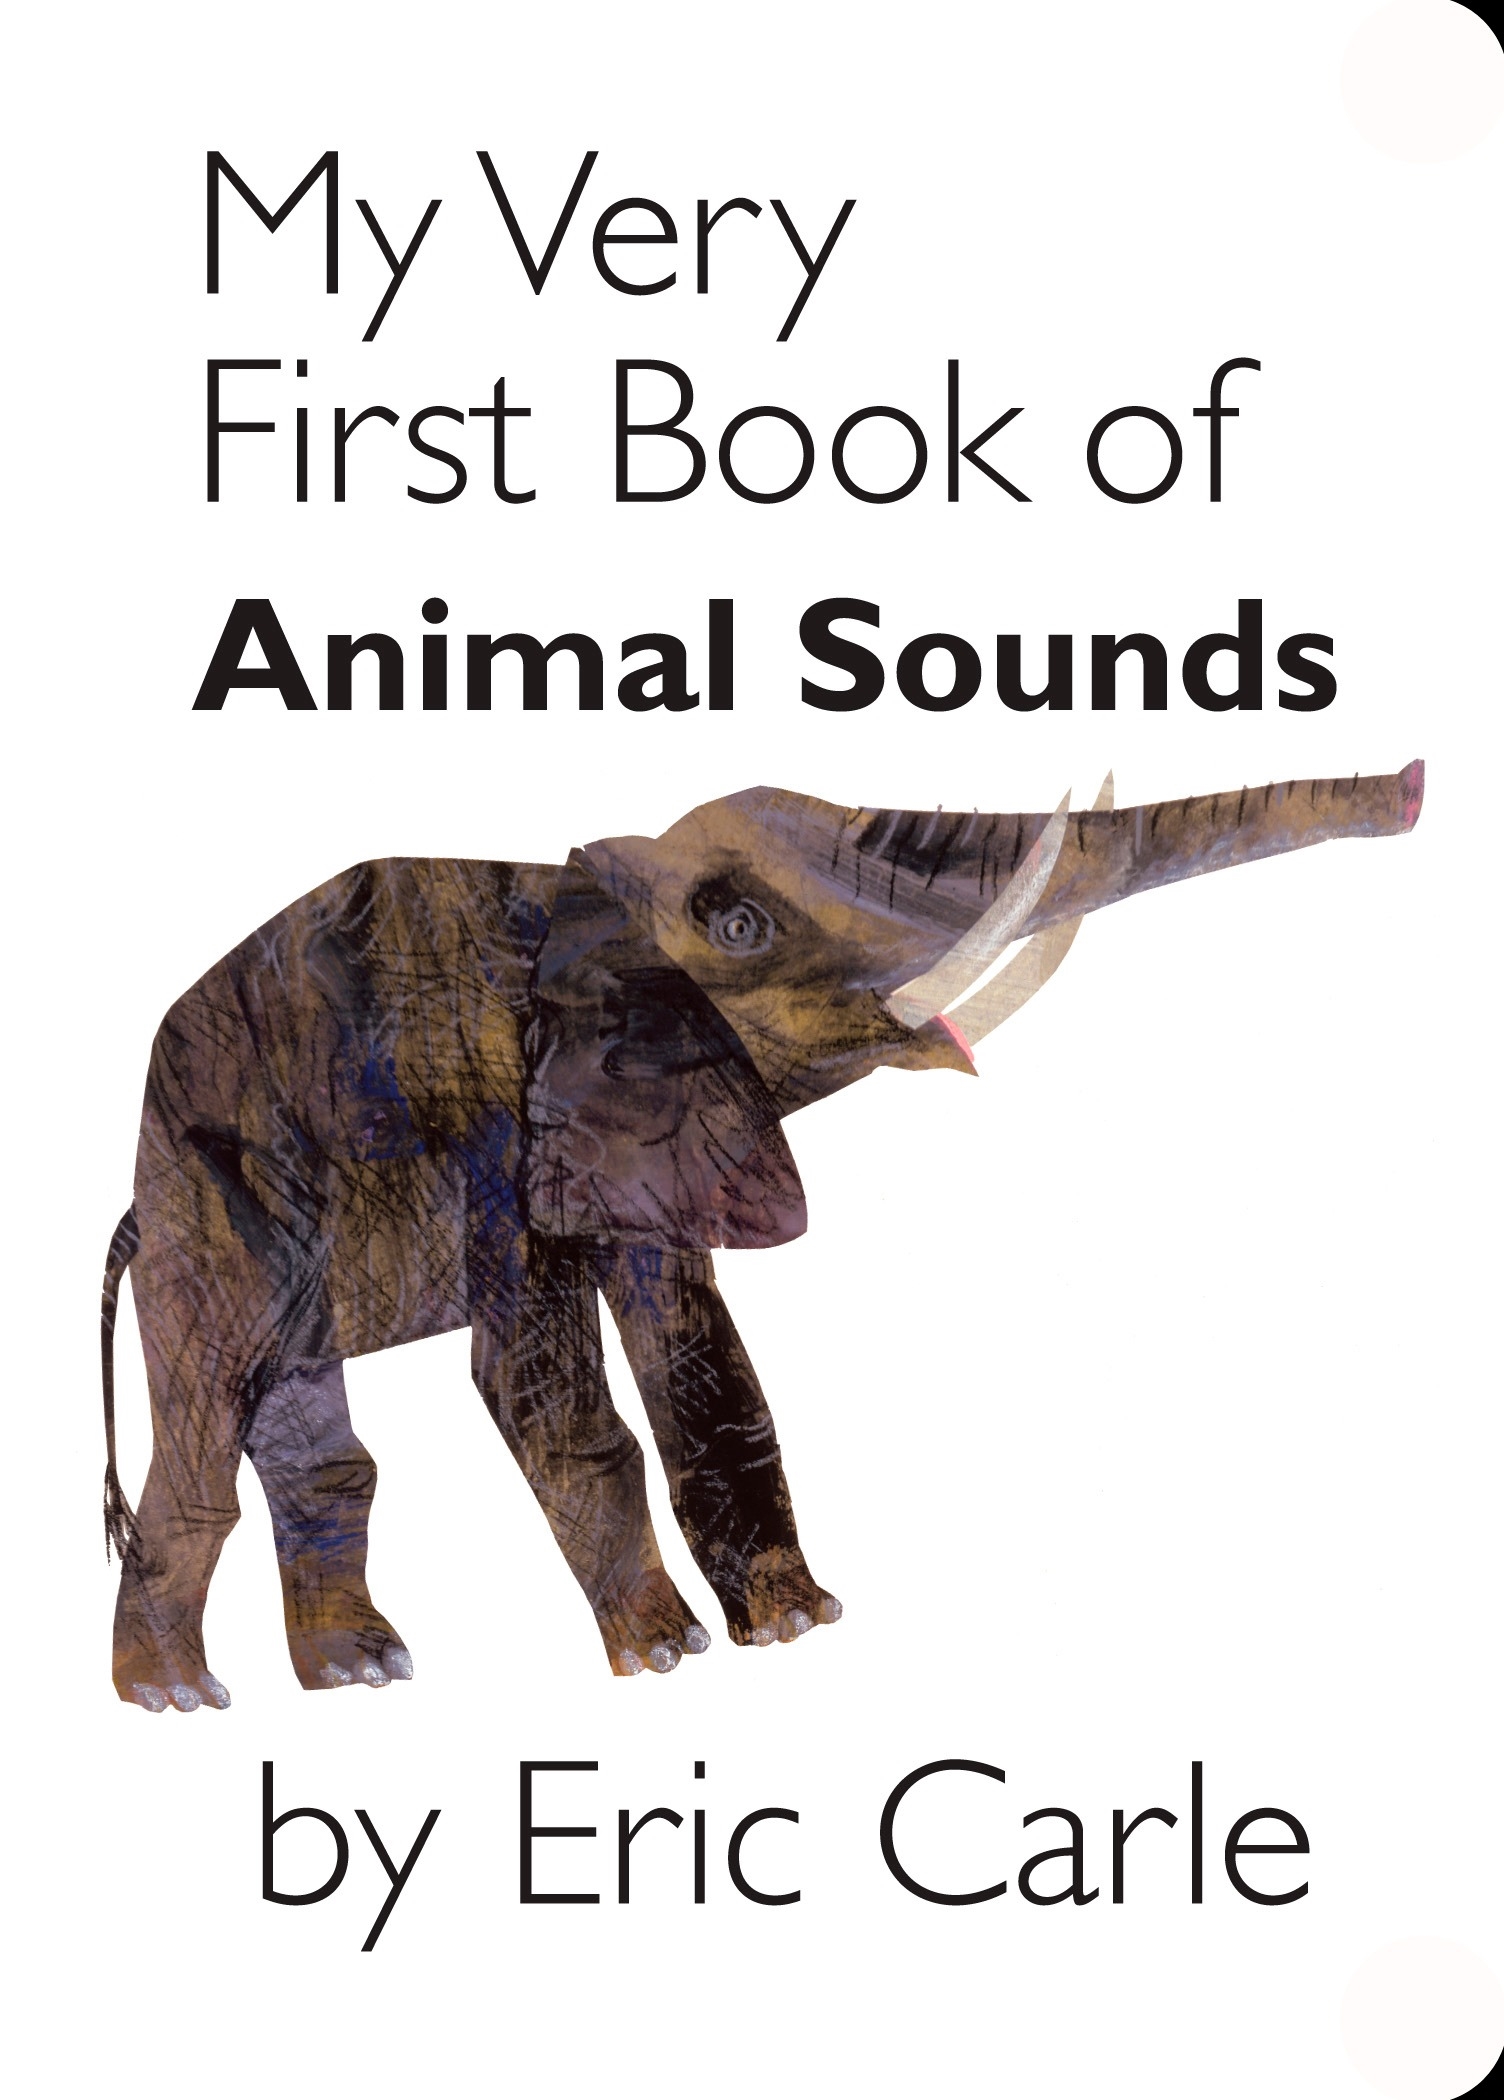 My Very First Book of Animal Sounds by Eric Carle - Penguin Books Australia